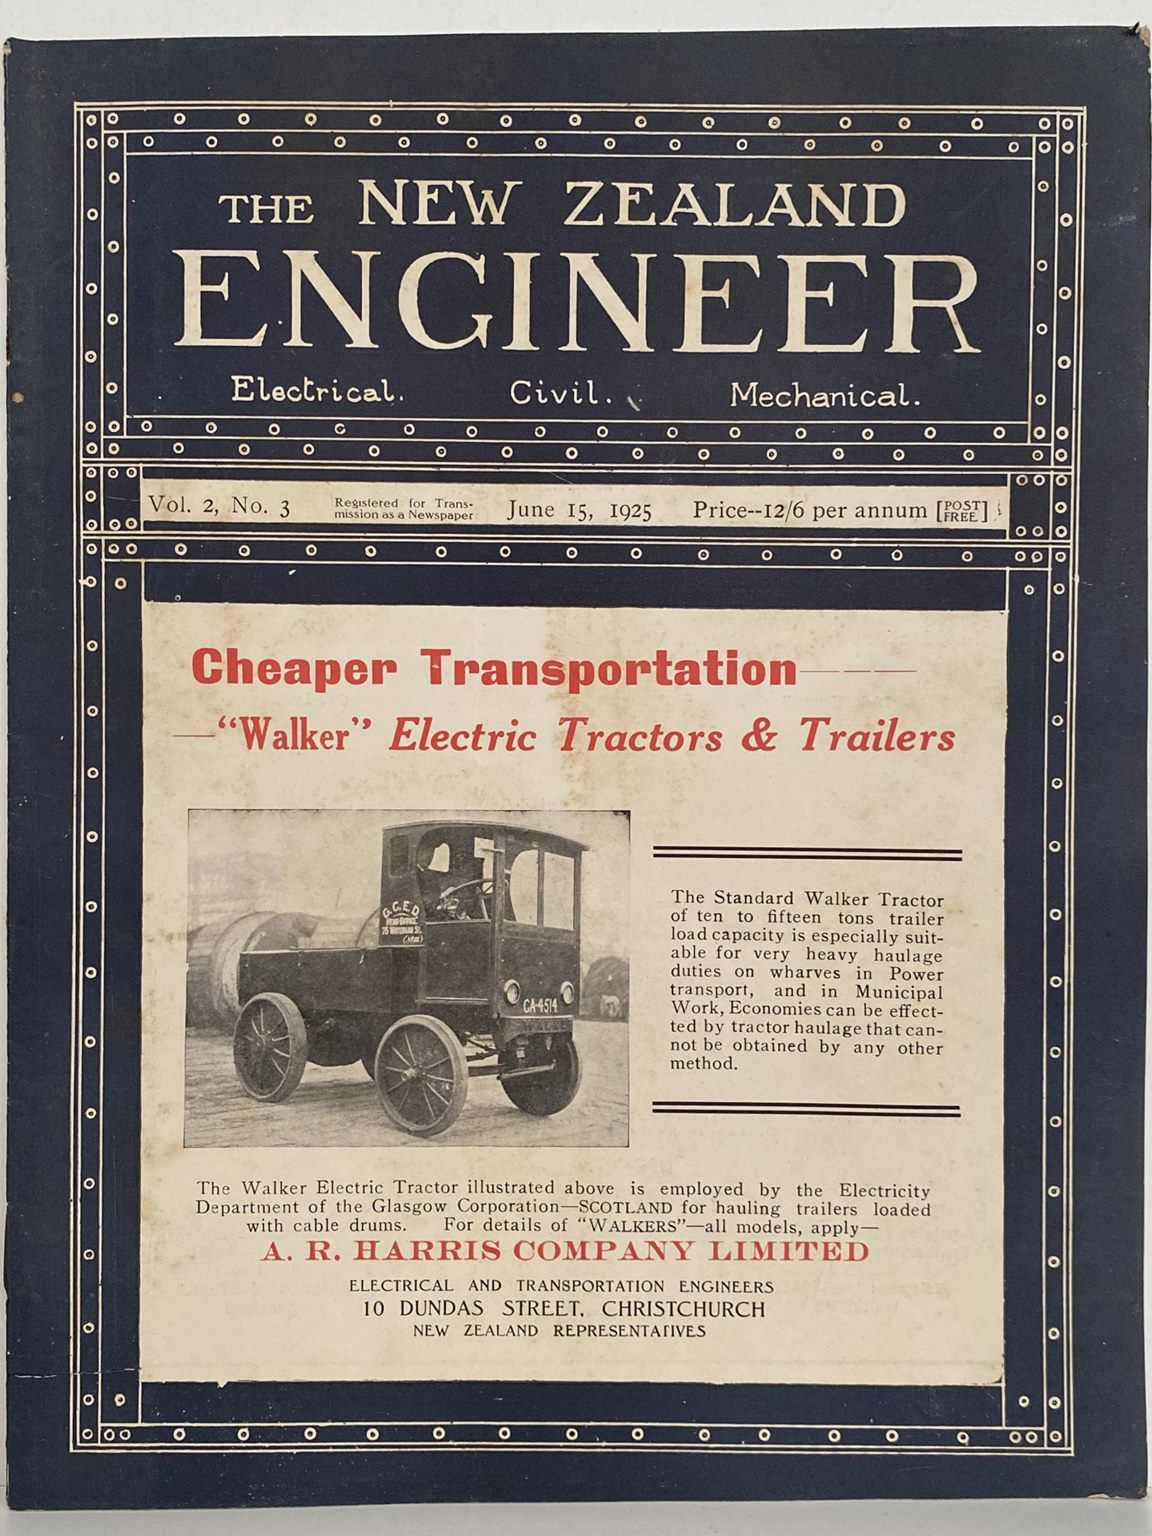 OLD MAGAZINE: The New Zealand Engineer Vol. 2, No. 3 - 15 June 1925